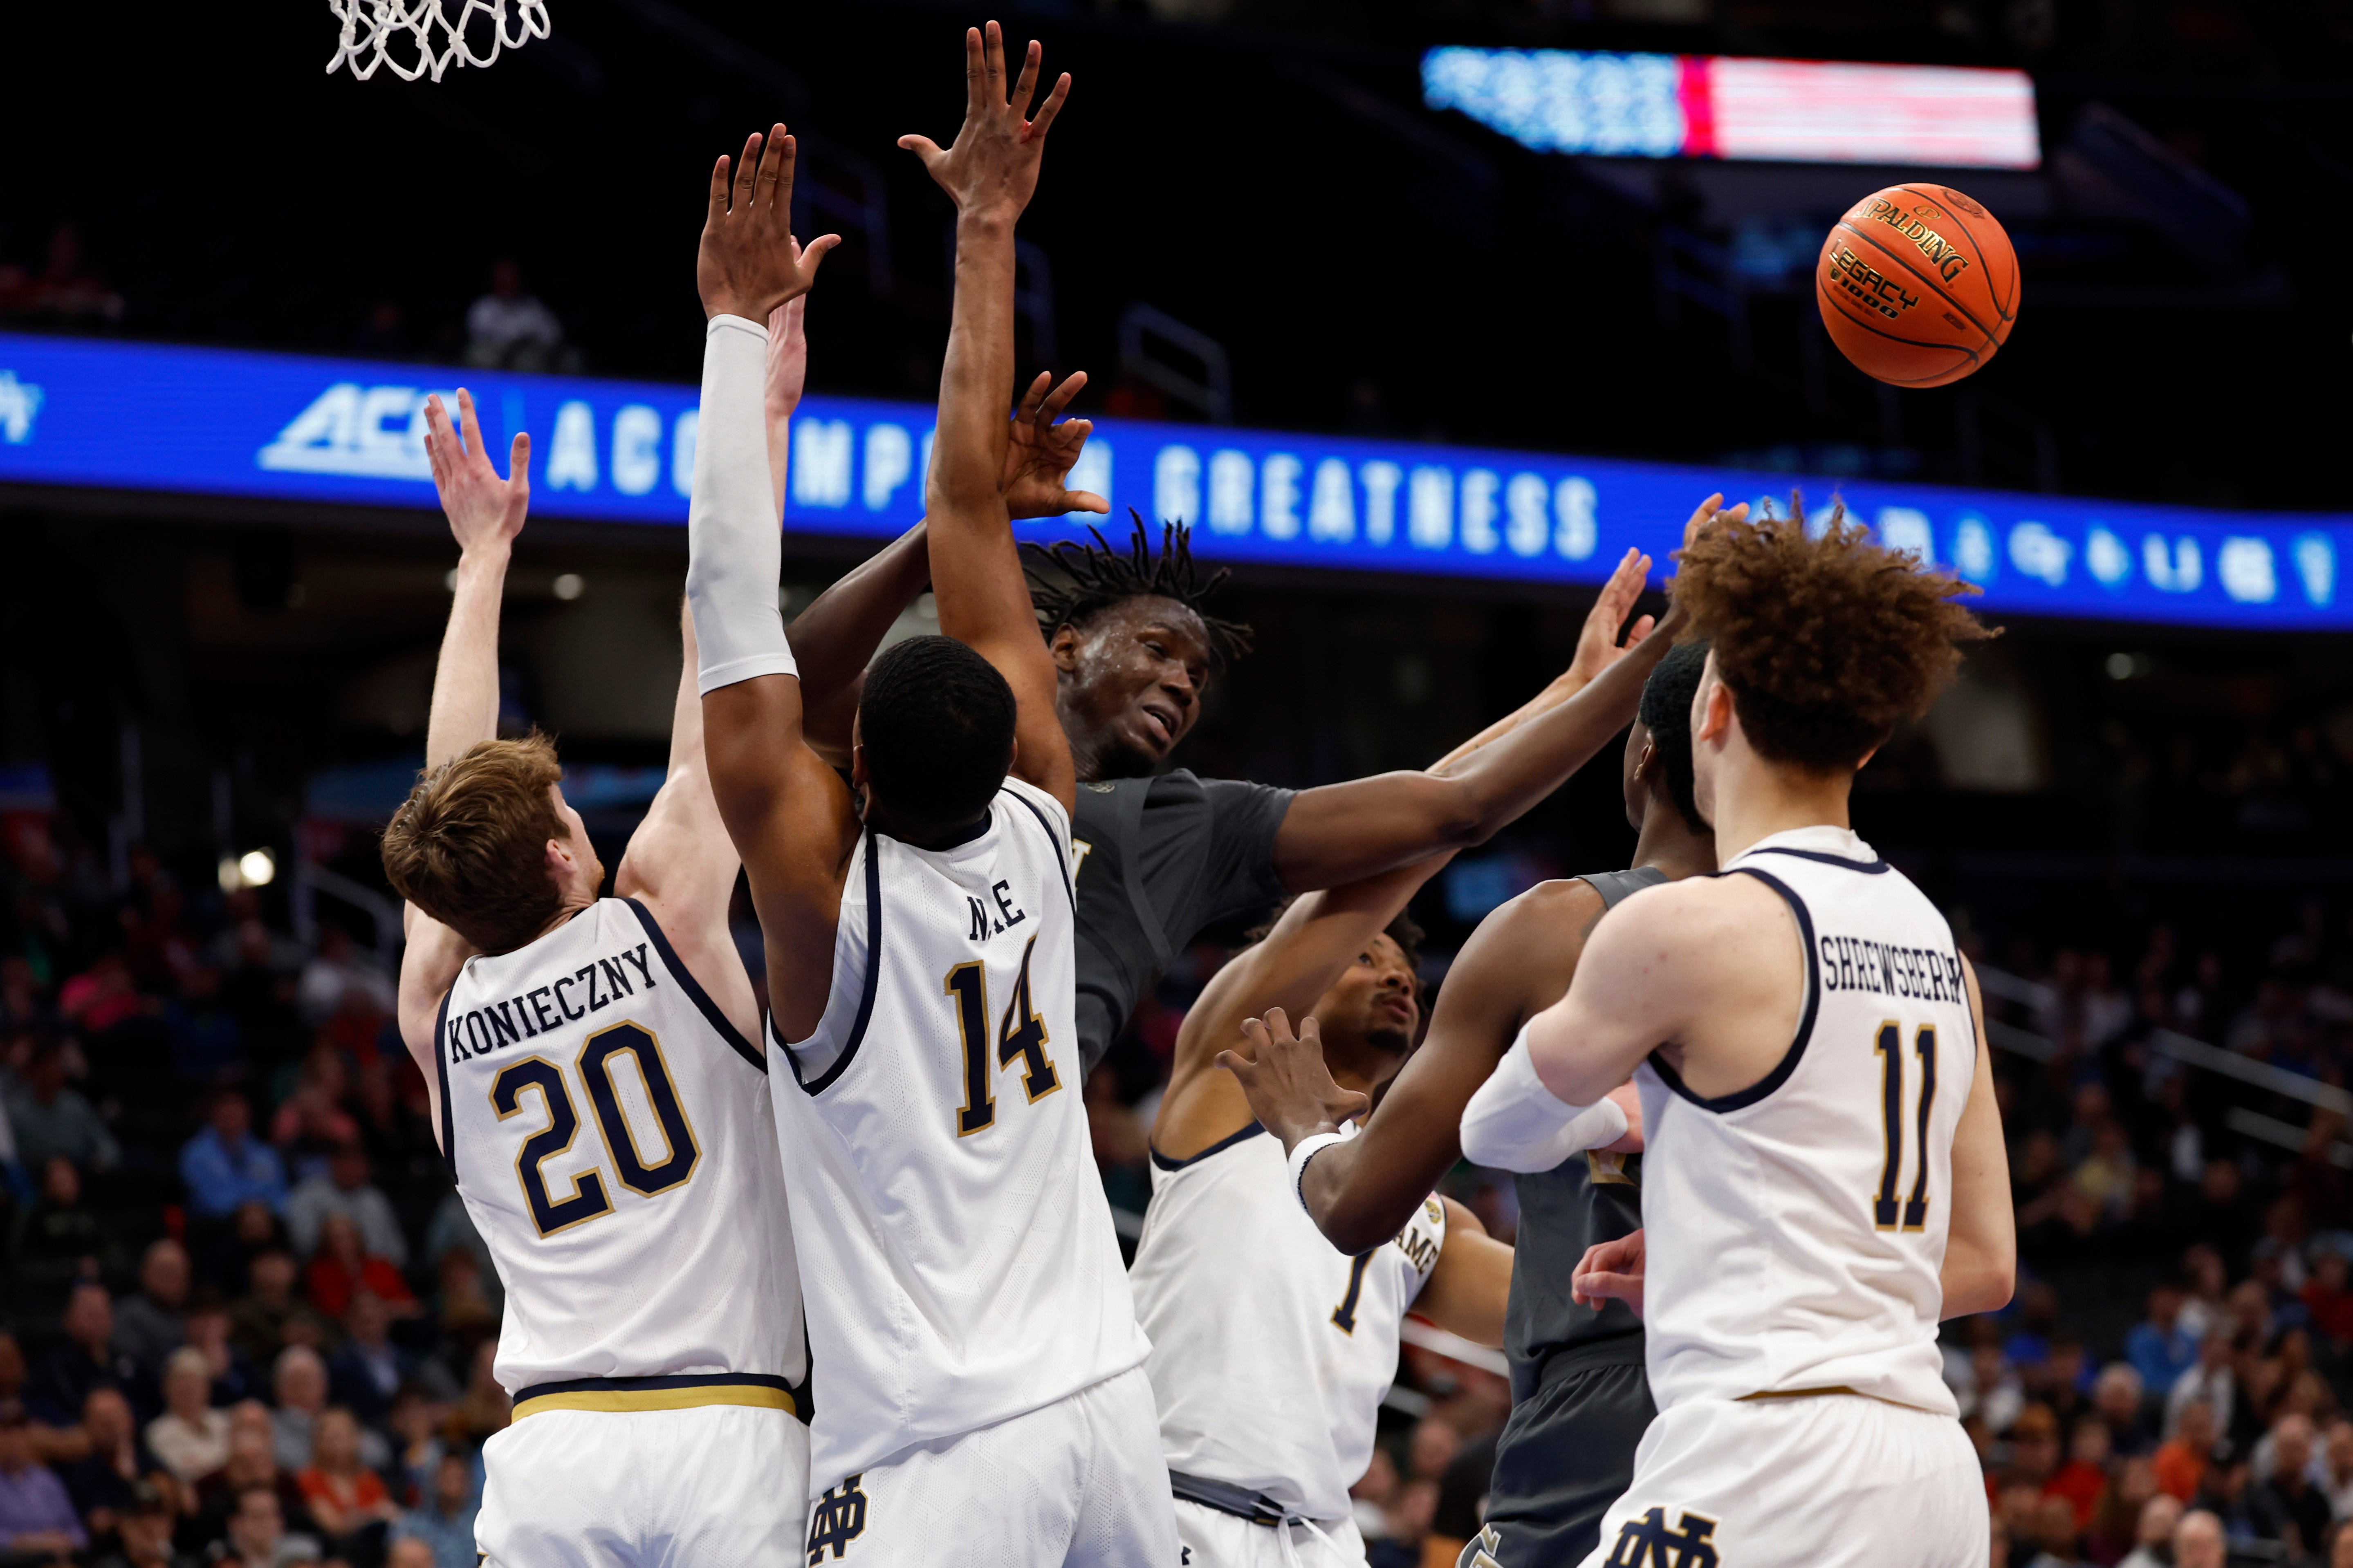 Mar 12, 2024; Washington, D.C., USA; Georgia Tech Yellow Jackets guard Miles Kelly (13) is fouled by Notre Dame Fighting Irish forward Kebba Njie (14) in the first half at Capital One Arena. Mandatory Credit: Geoff Burke-USA TODAY Sports